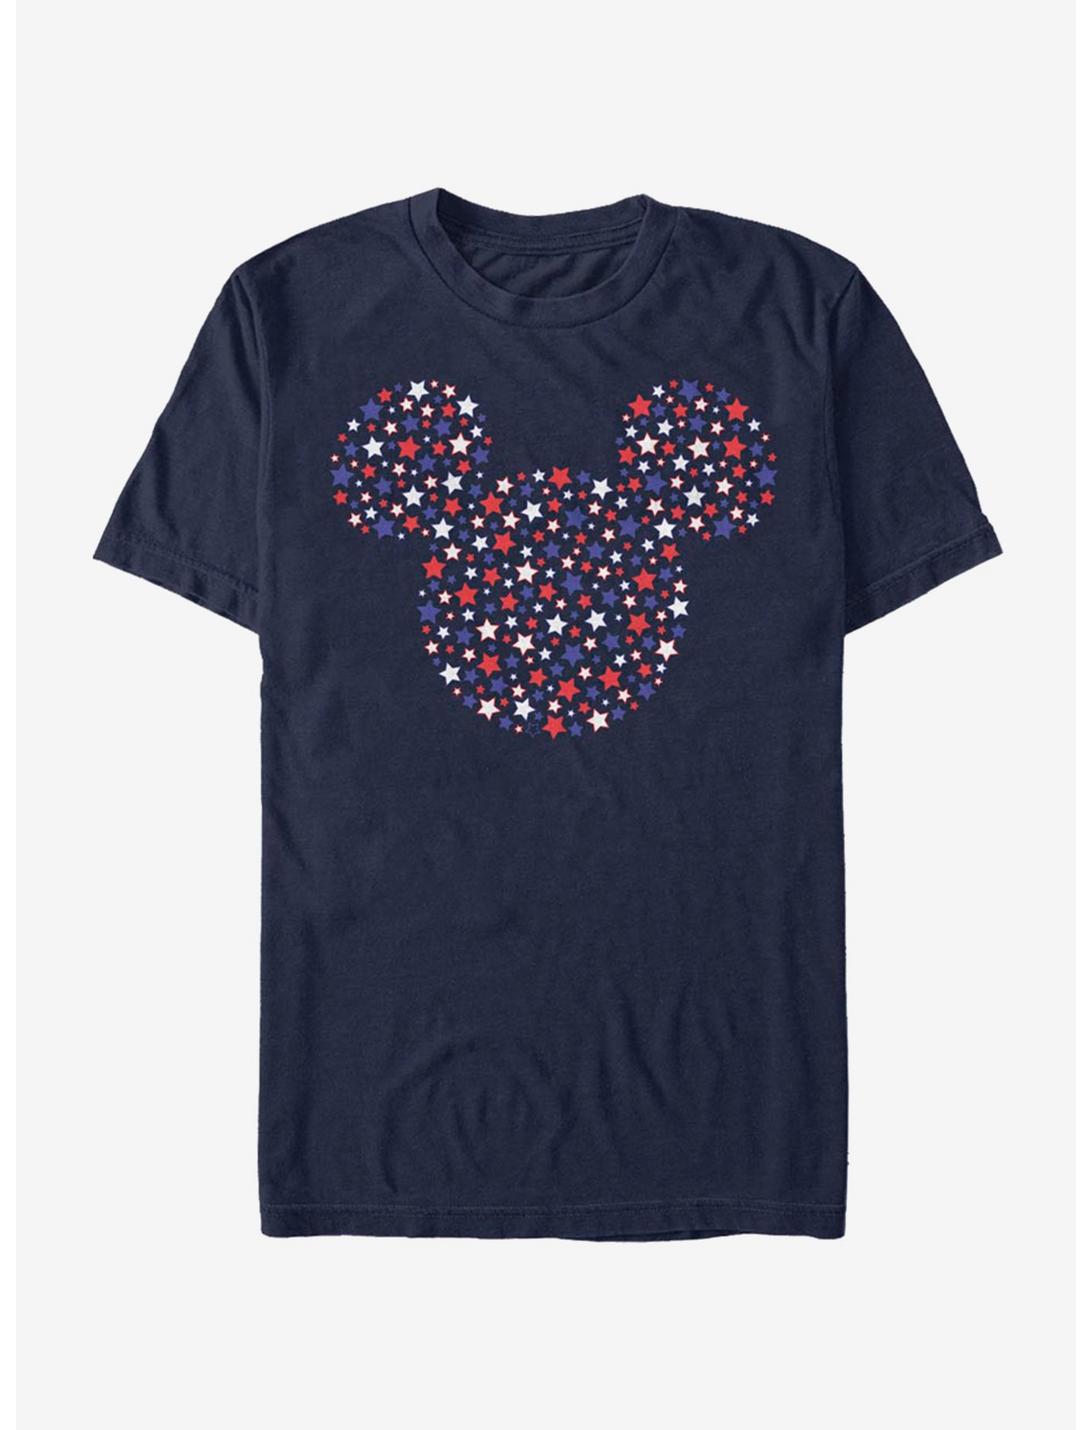 Disney Mickey Mouse Stars and Ears T-Shirt, NAVY, hi-res